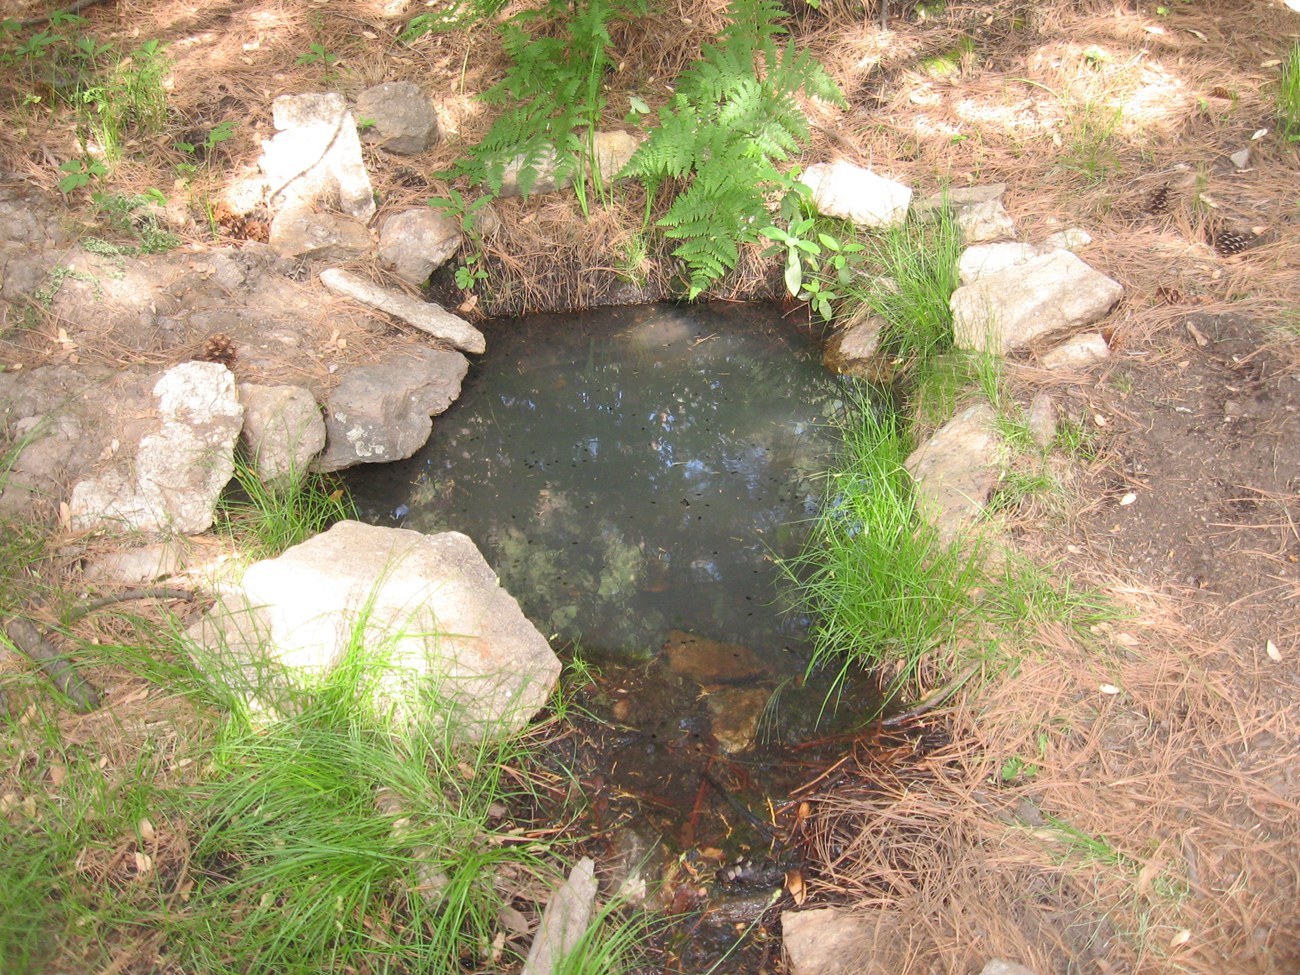 Spud rock spring. It is a small pool of water surrounded by boulders, with green vegetation along its edges.